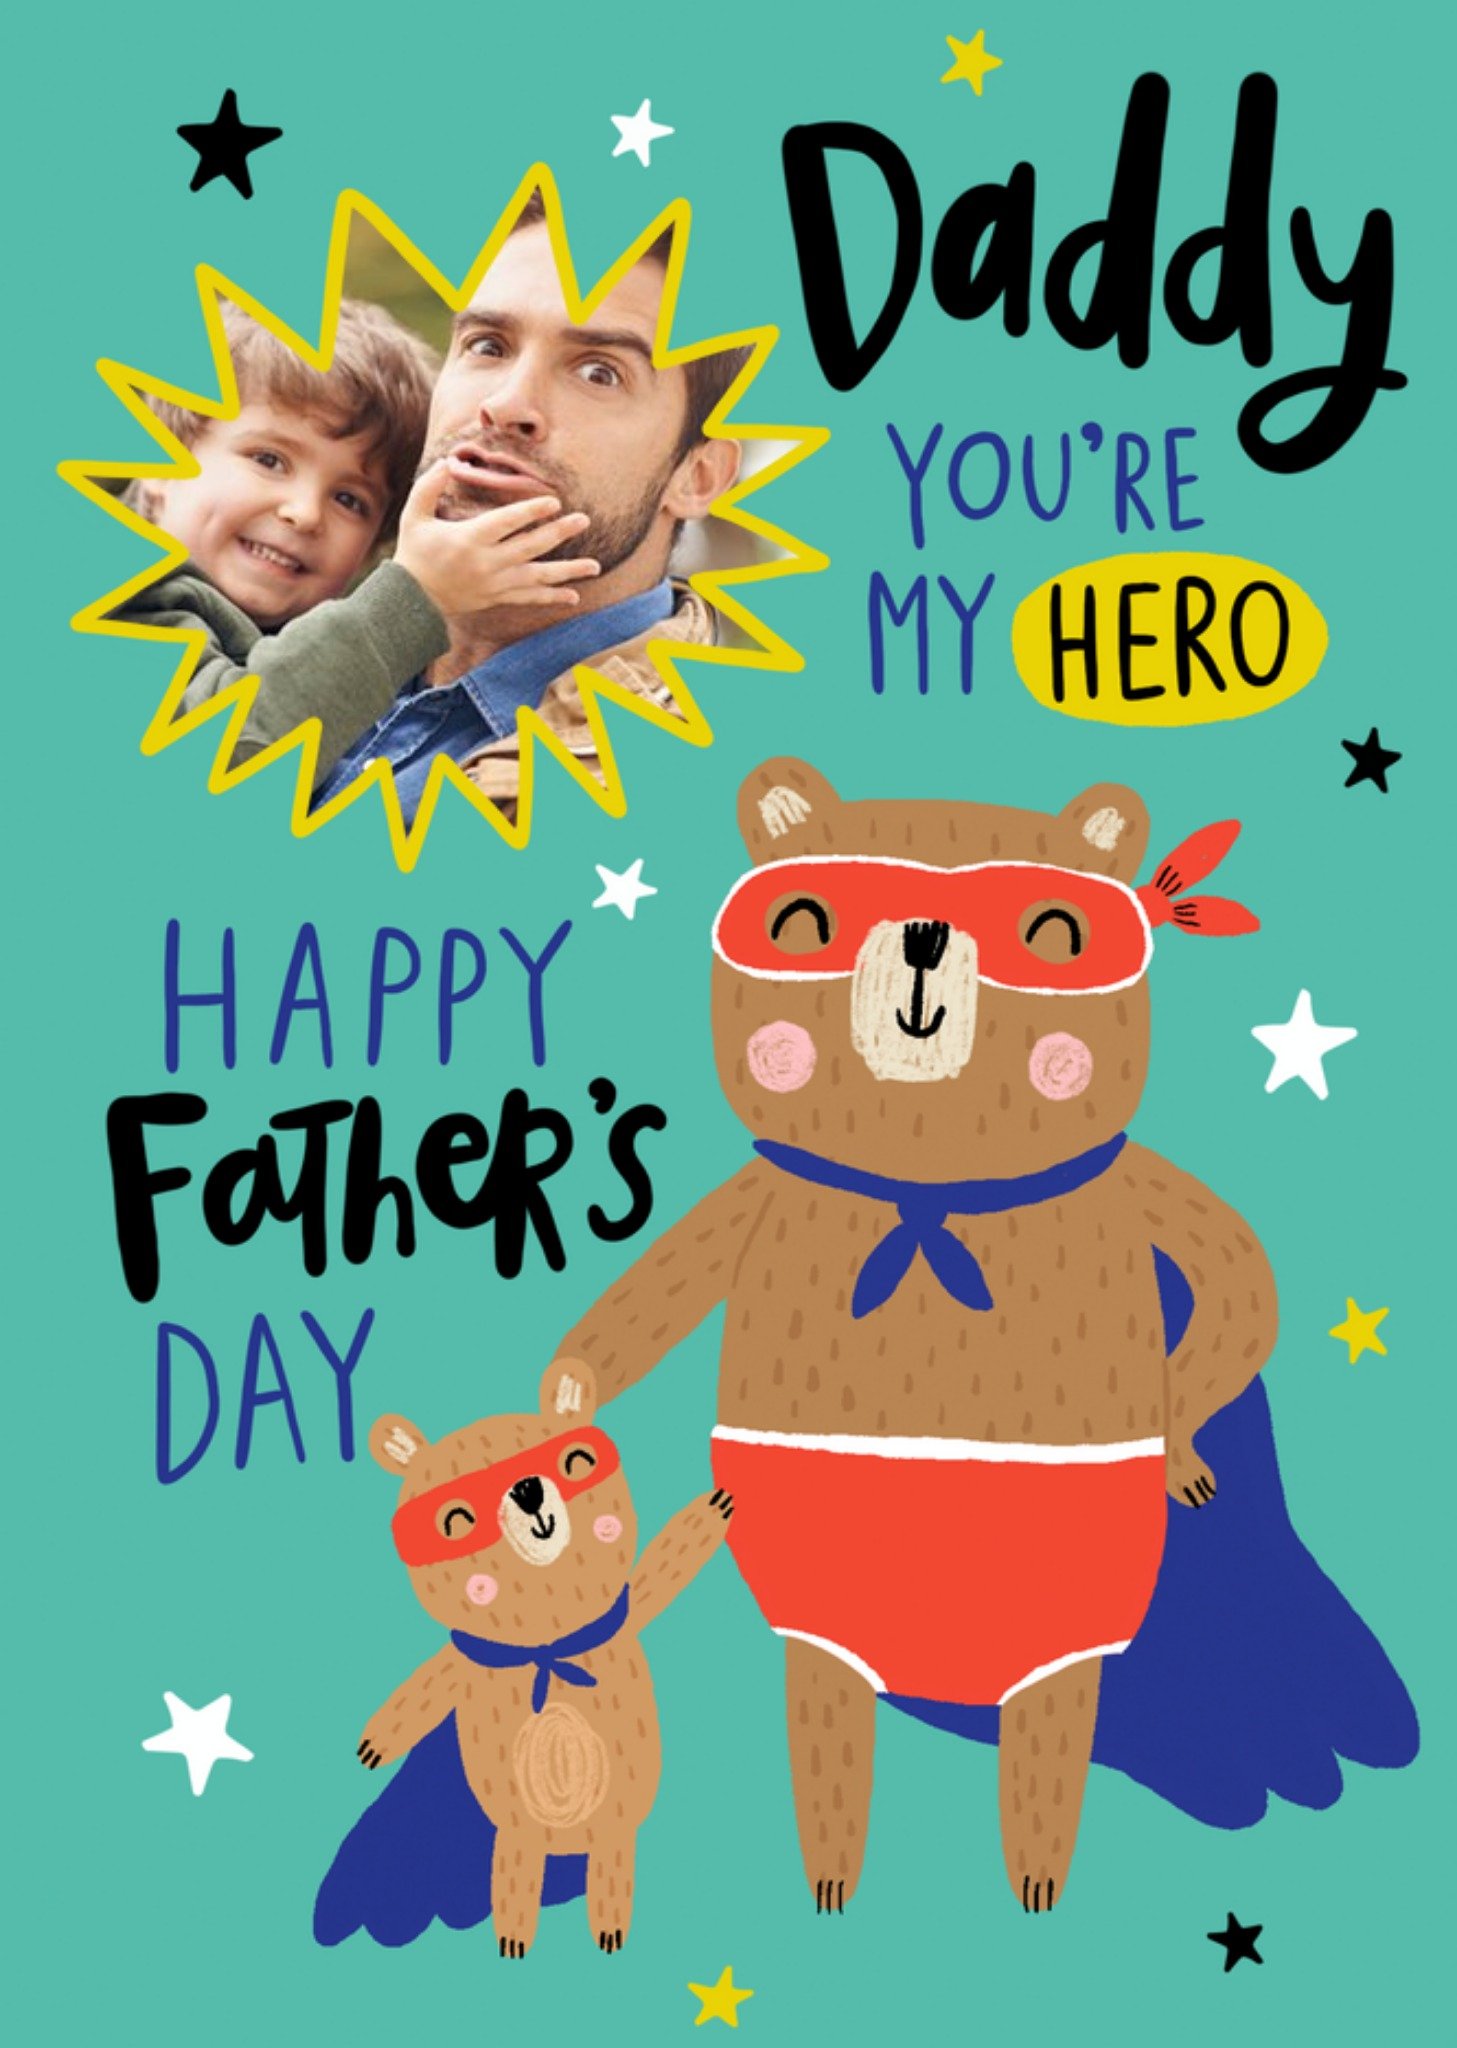 Moonpig Illustrated Cute Daddy Youre My Hero Happy Fathers Day Card Ecard